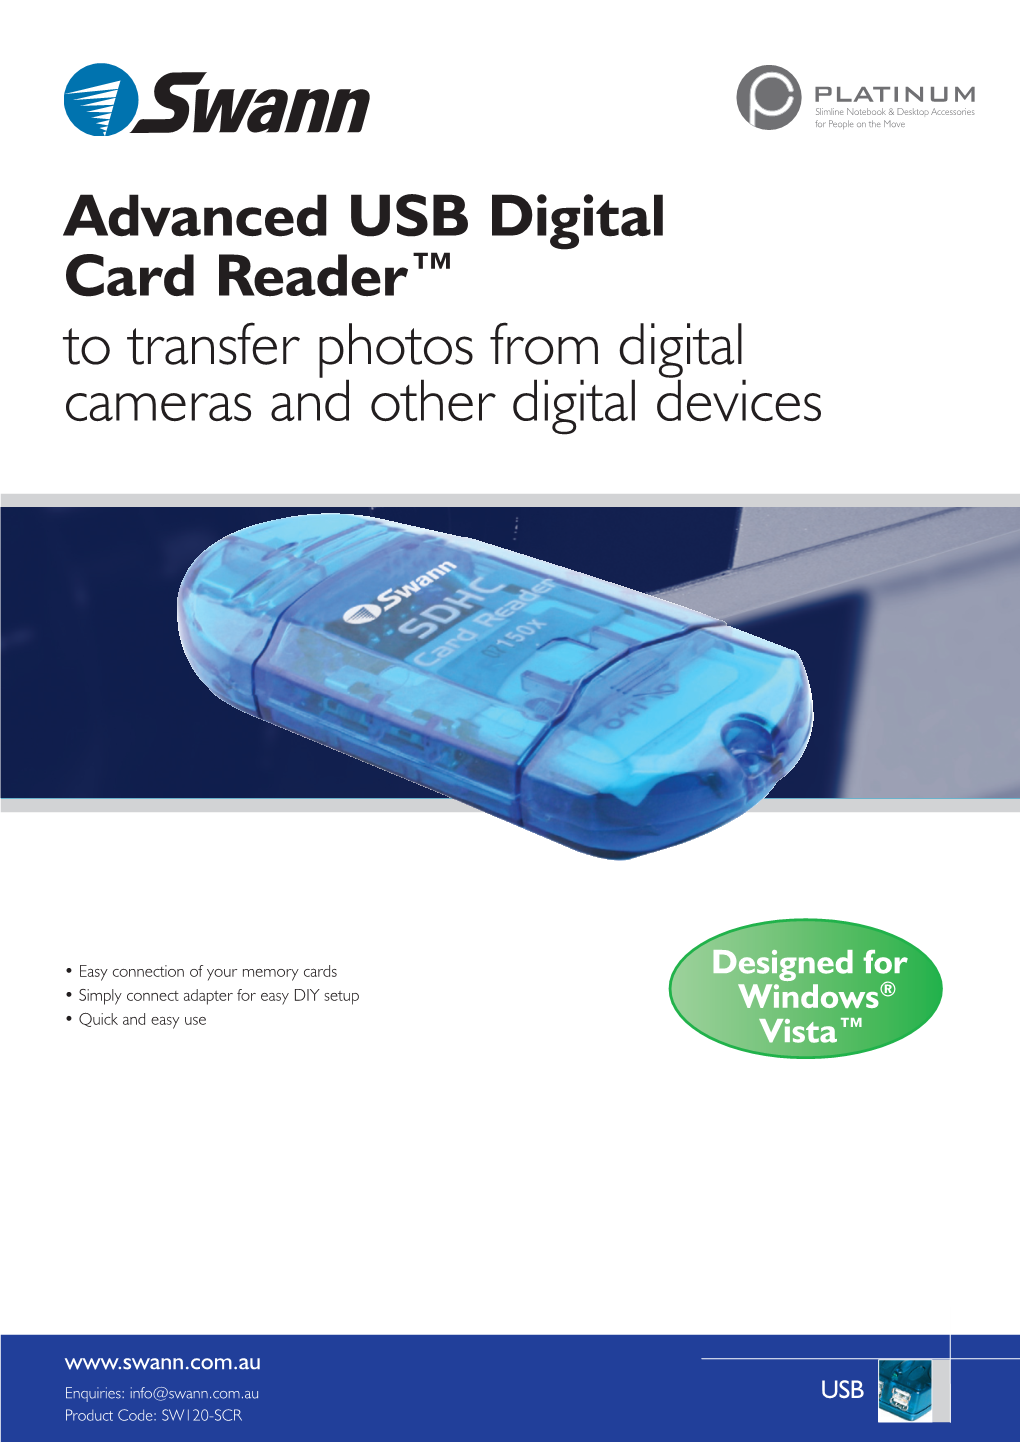 Advanced USB Digital Card Reader™ to Transfer Photos from Digital Cameras and Other Digital Devices